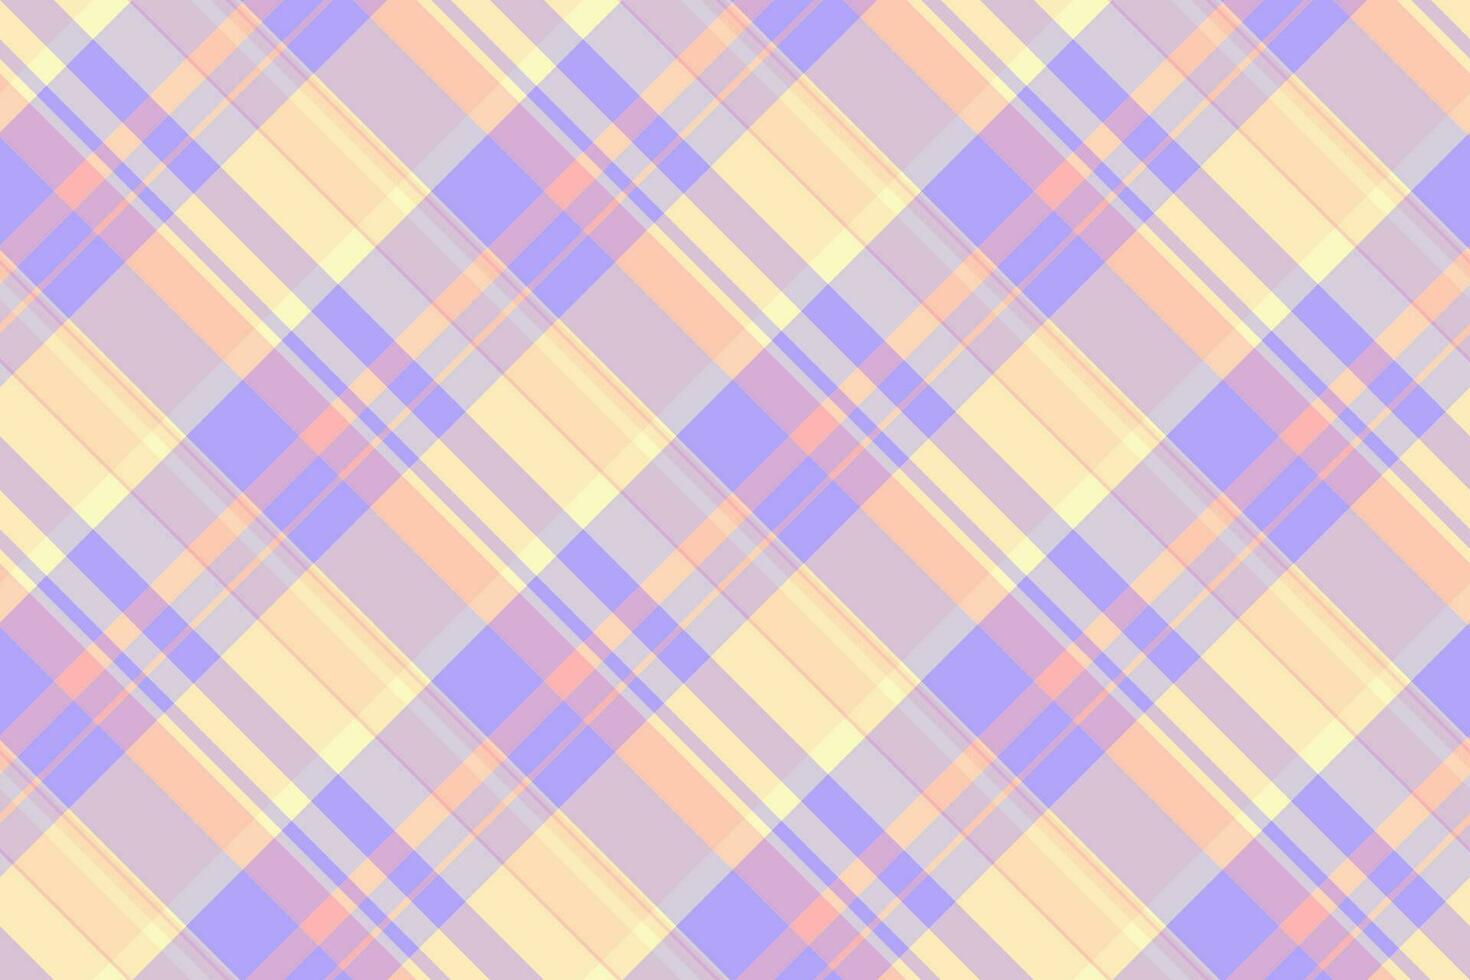 Texture textile seamless of vector pattern fabric with a background check tartan plaid.